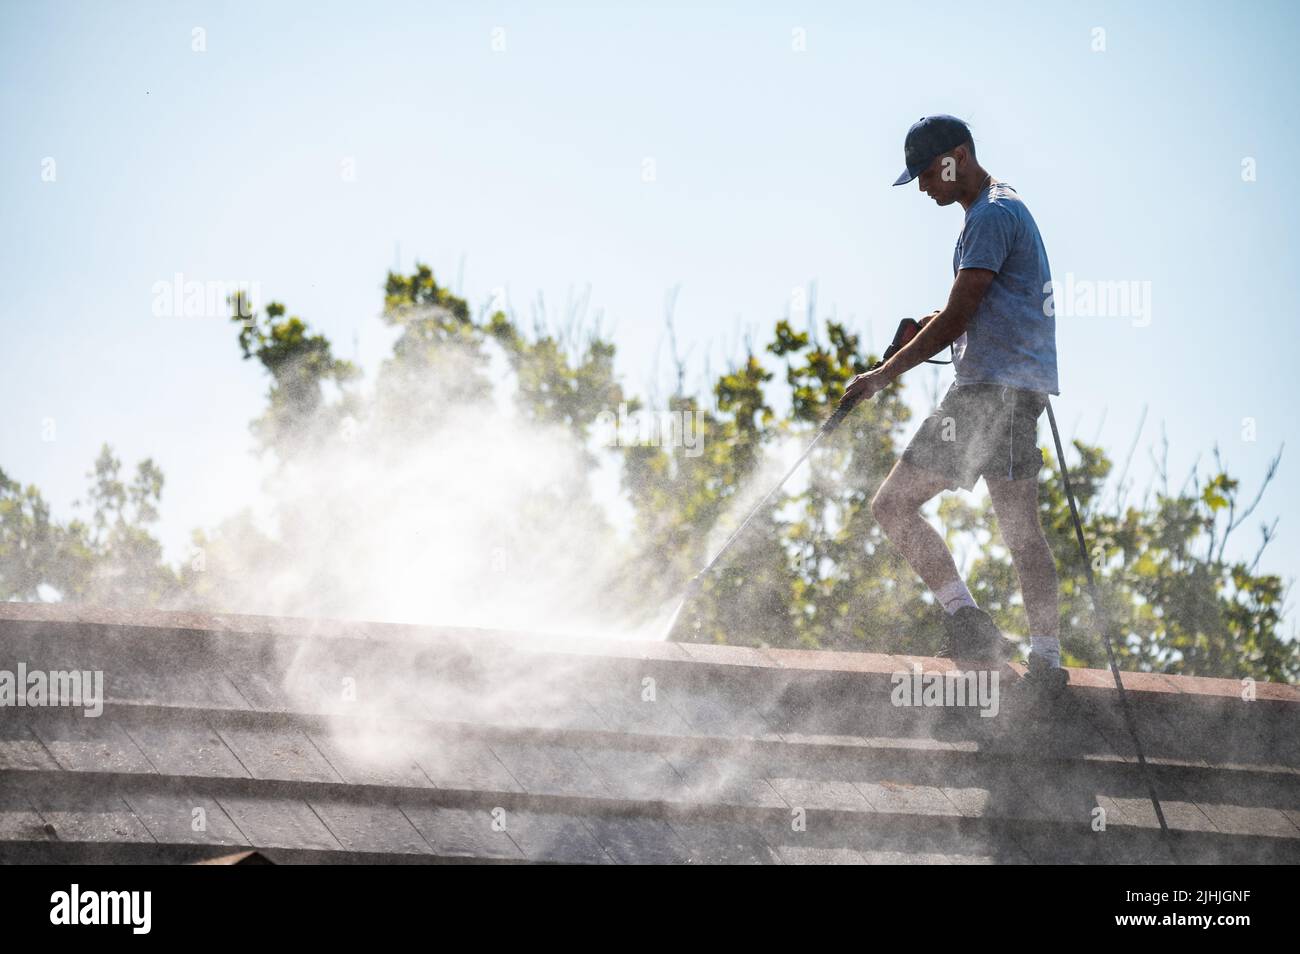 Rustington, West Sussex, UK. Tuesday 19th July 2022. A man uses a jet wash to clean a house roof this morning as the heat continues to incease, near the south coast. Credit: Geoff Smith/Alamy Live News Stock Photo